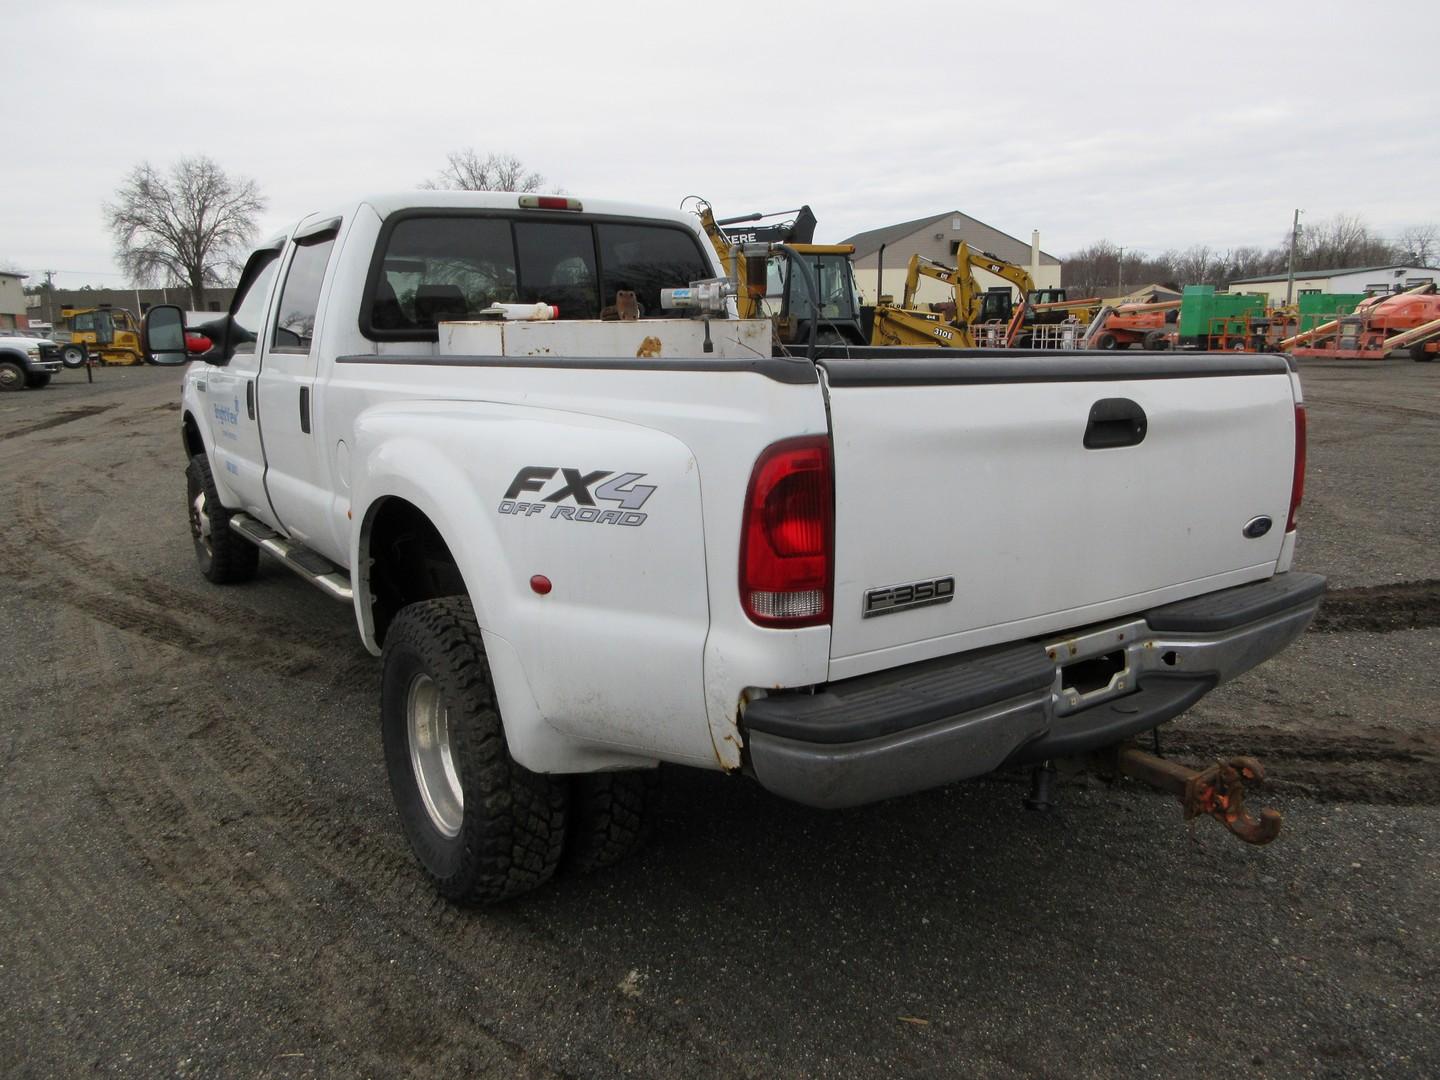 2004 Ford F-350 Crew Cab Dually Pickup